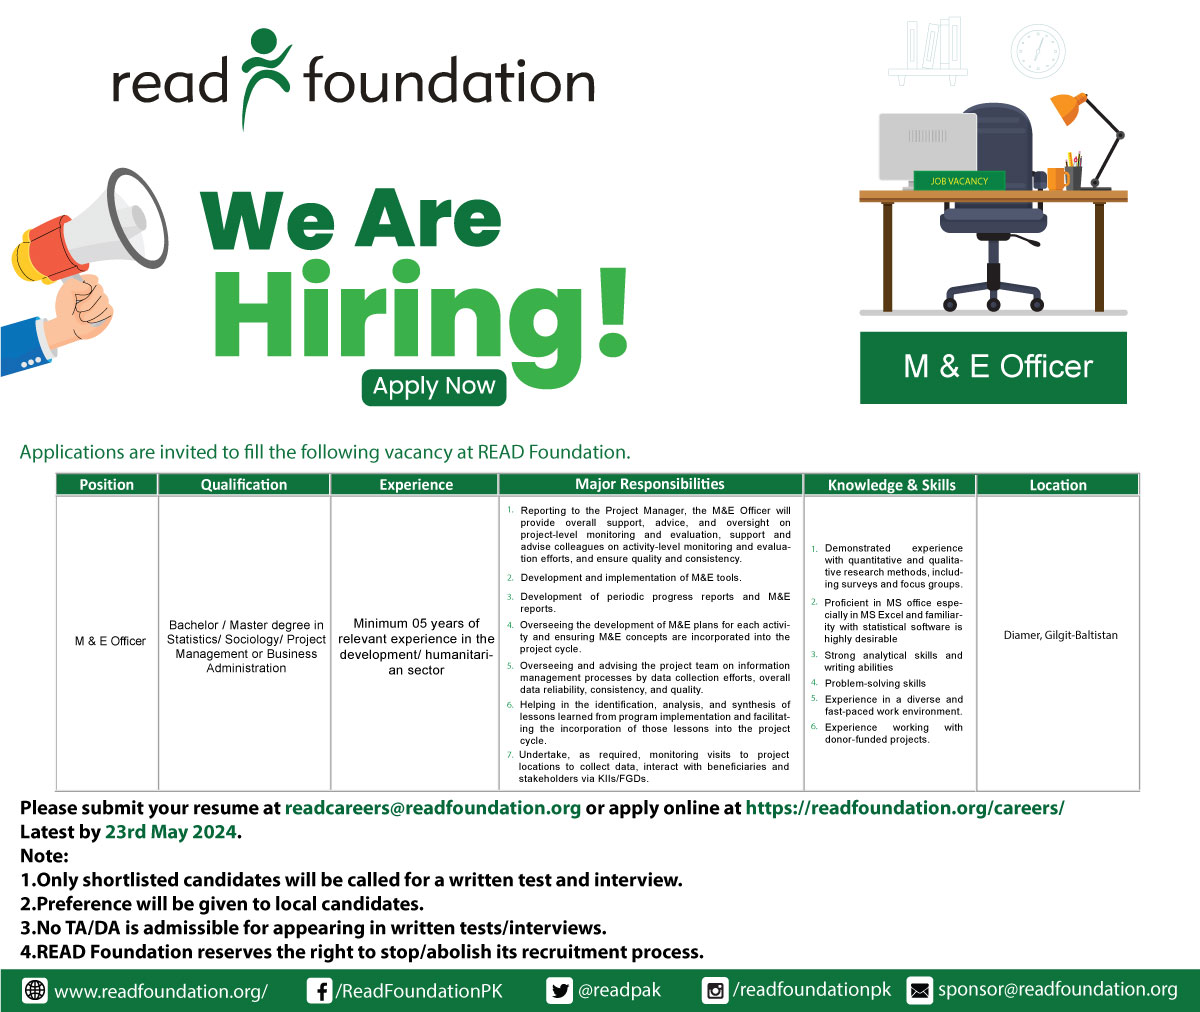 Job Alert!!! Elevate your career with us! Seeking dedicated talents who are ready to innovate and thrive. Please apply at the given link: readfoundation.org/careers/ (For any queries, please get in touch with us at +92 051 8482157 during office hours). #READFoundation #jobsearch